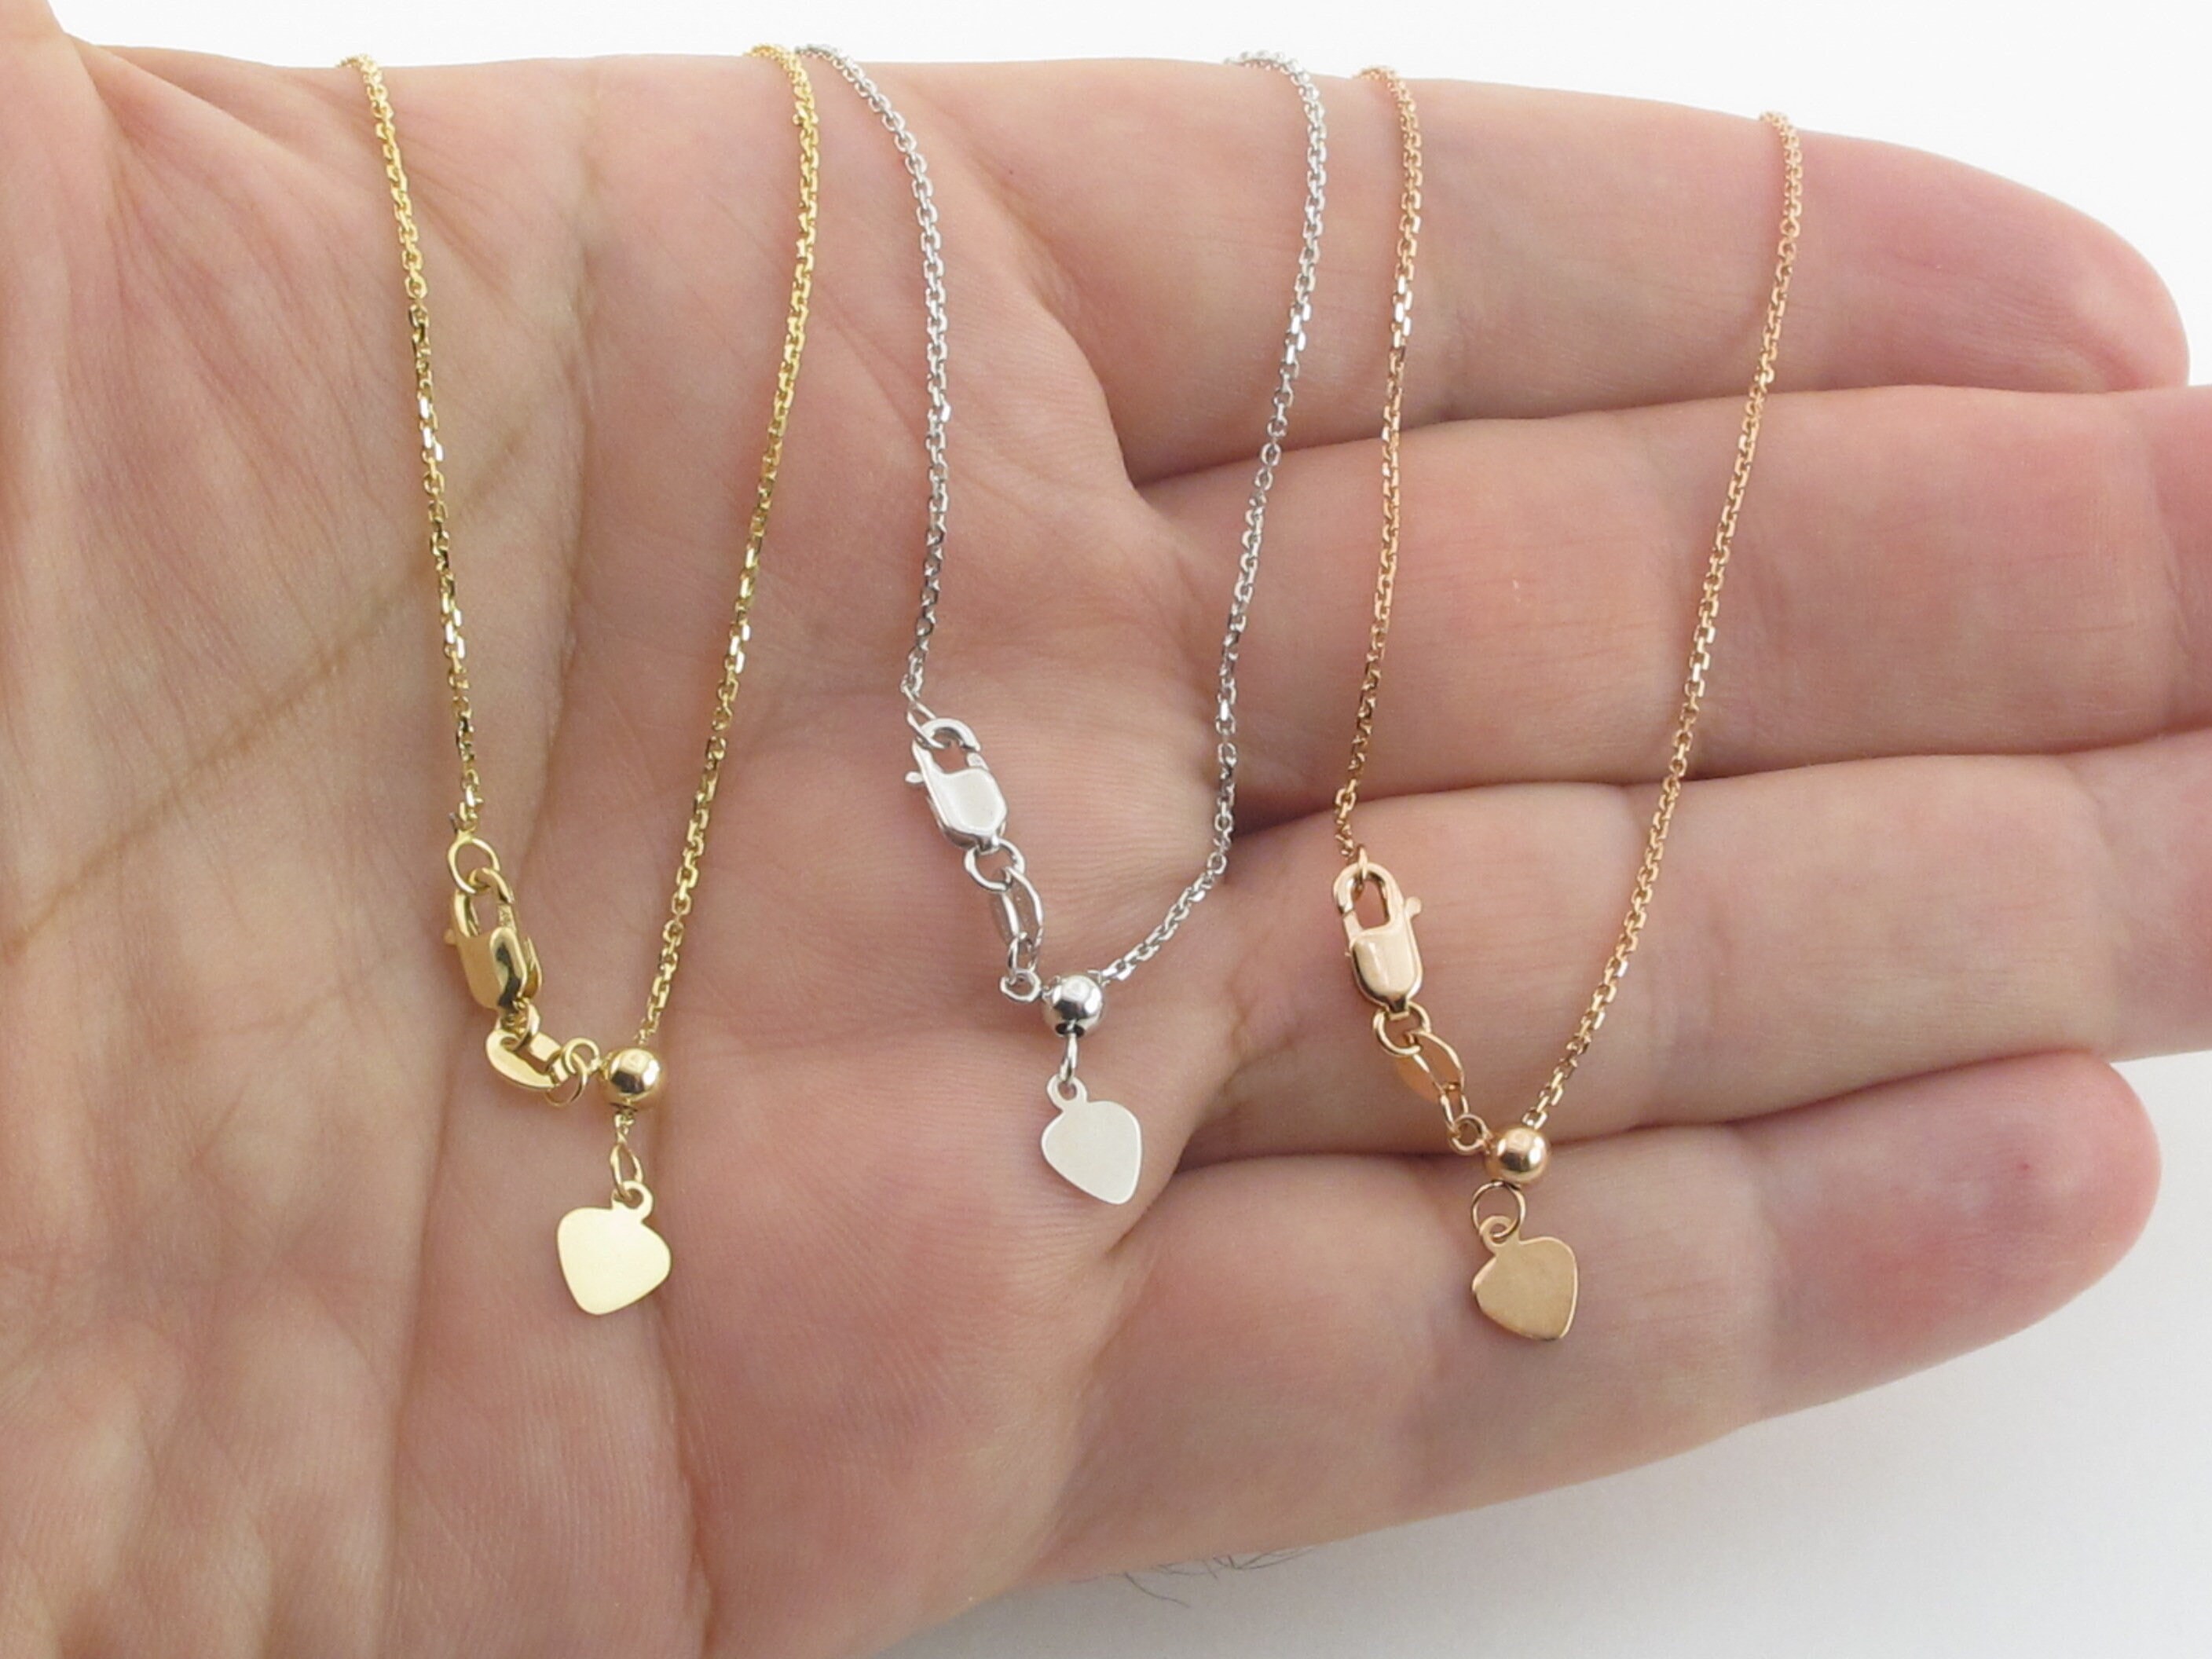 14K Gold Light Cable Chain Necklace with Lobster Lock